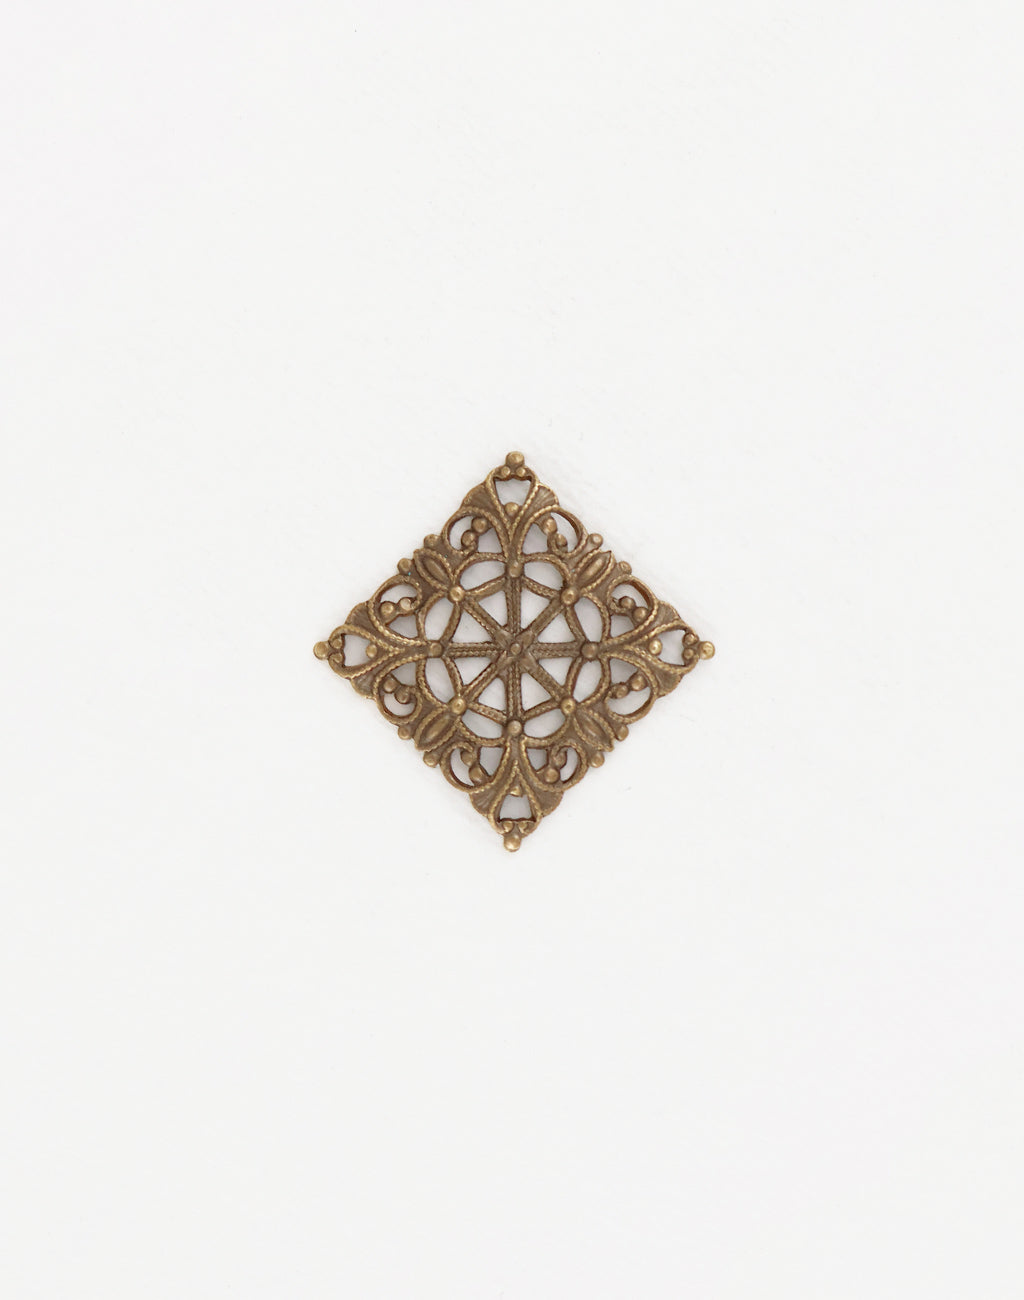 Moroccan Tile, 20mm, (1pc)